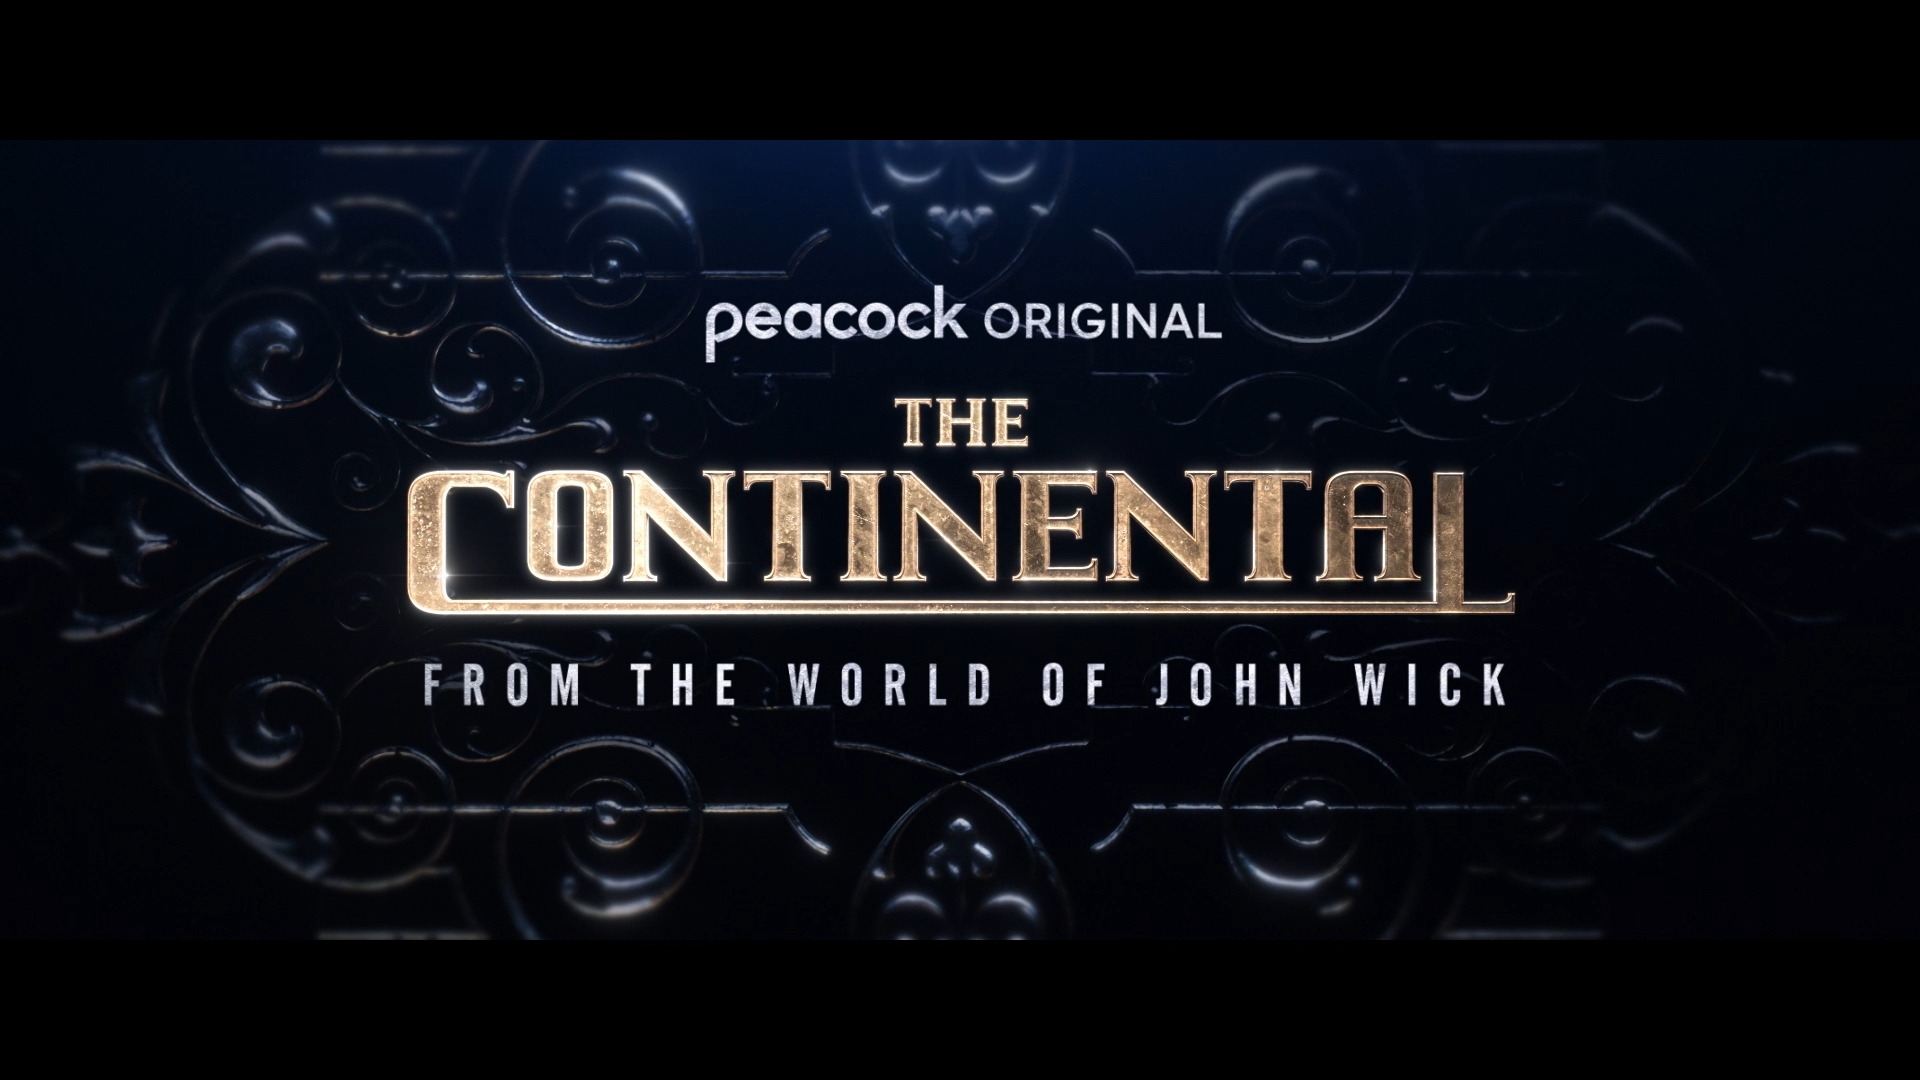 How to Attend The Continental's John Wick Pop-Up Bar in NYC